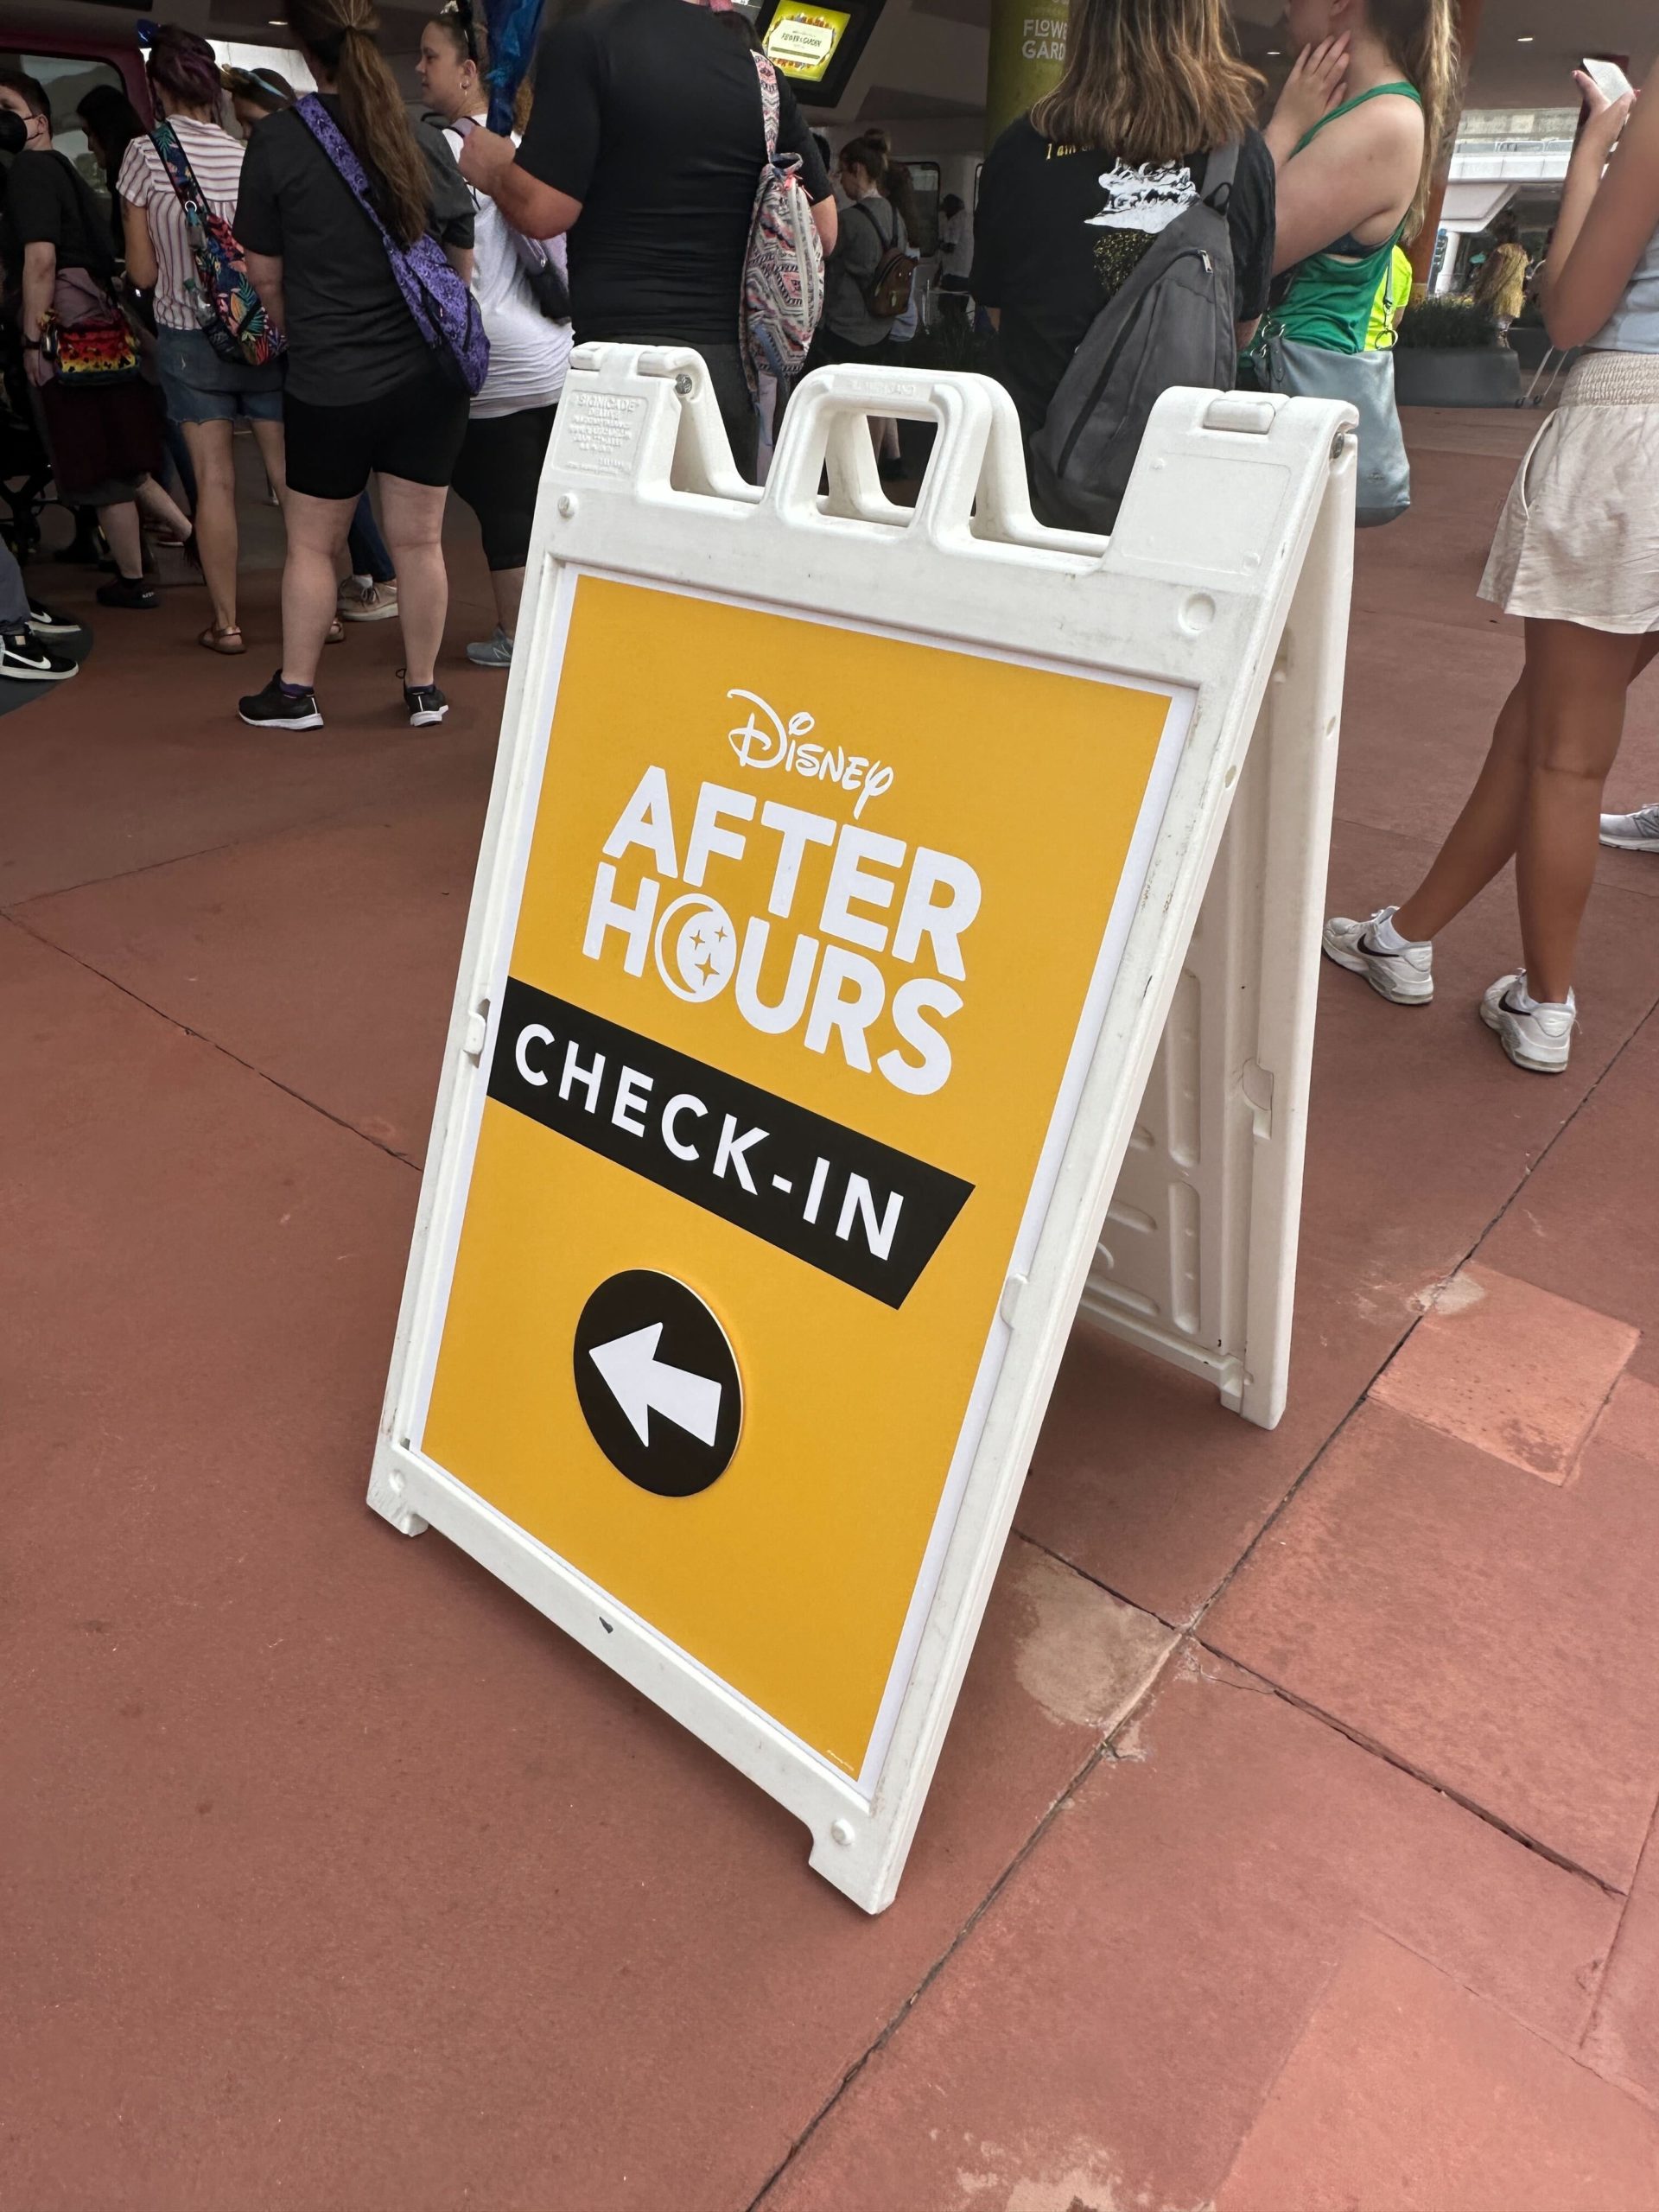 Disney After Hours Events Completely Sold Out for Disney's Hollywood